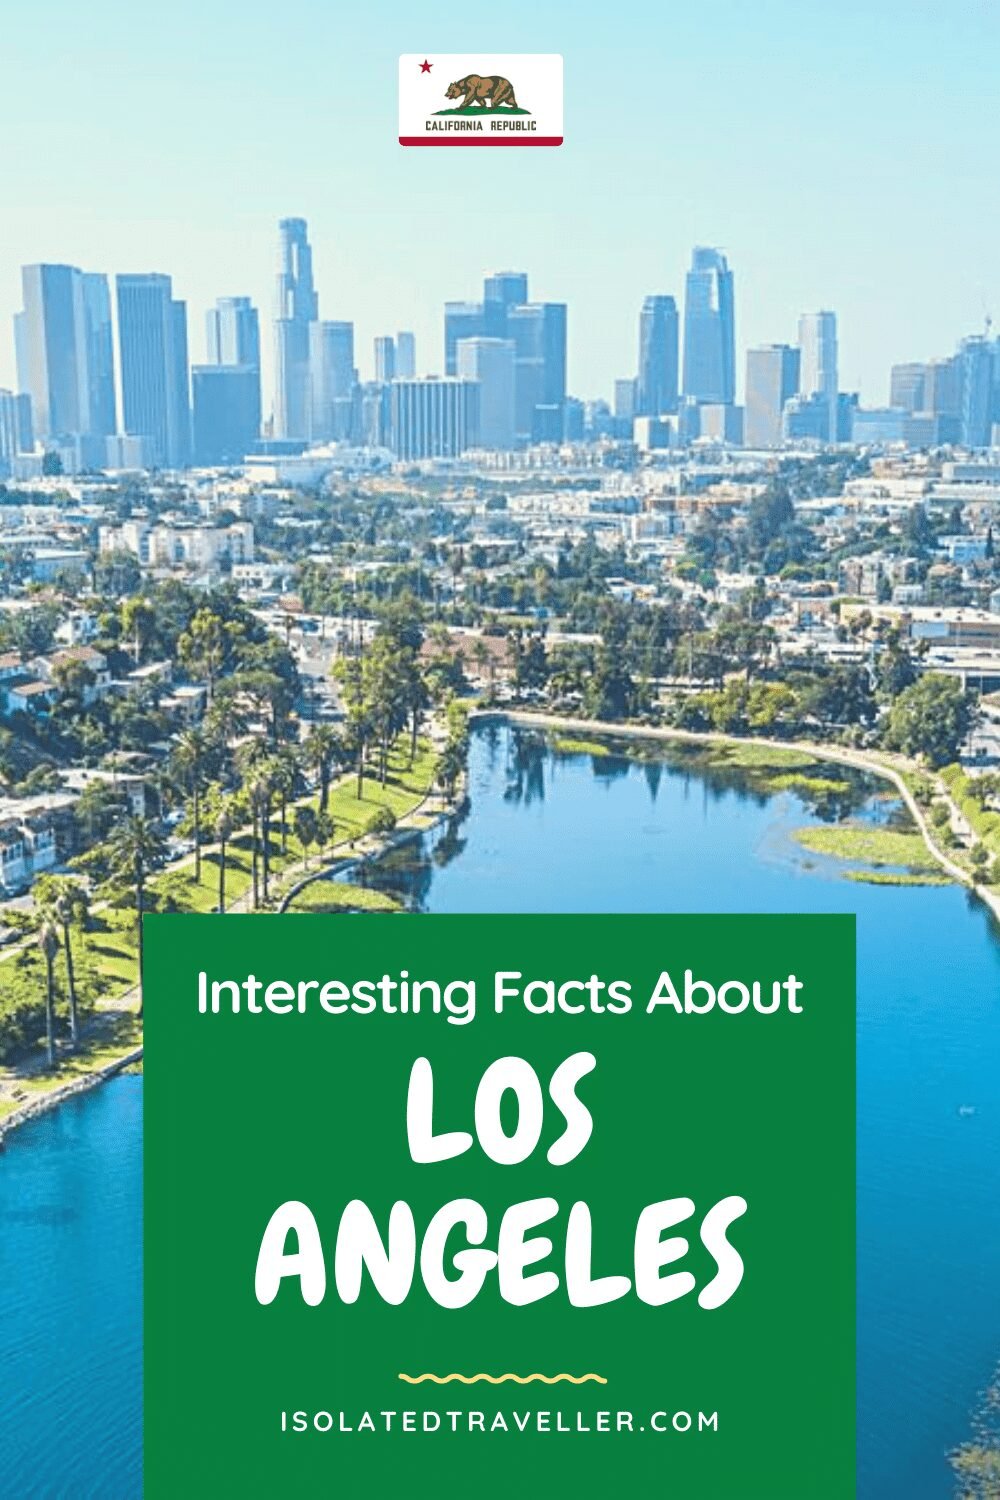 Facts About Los Angeles